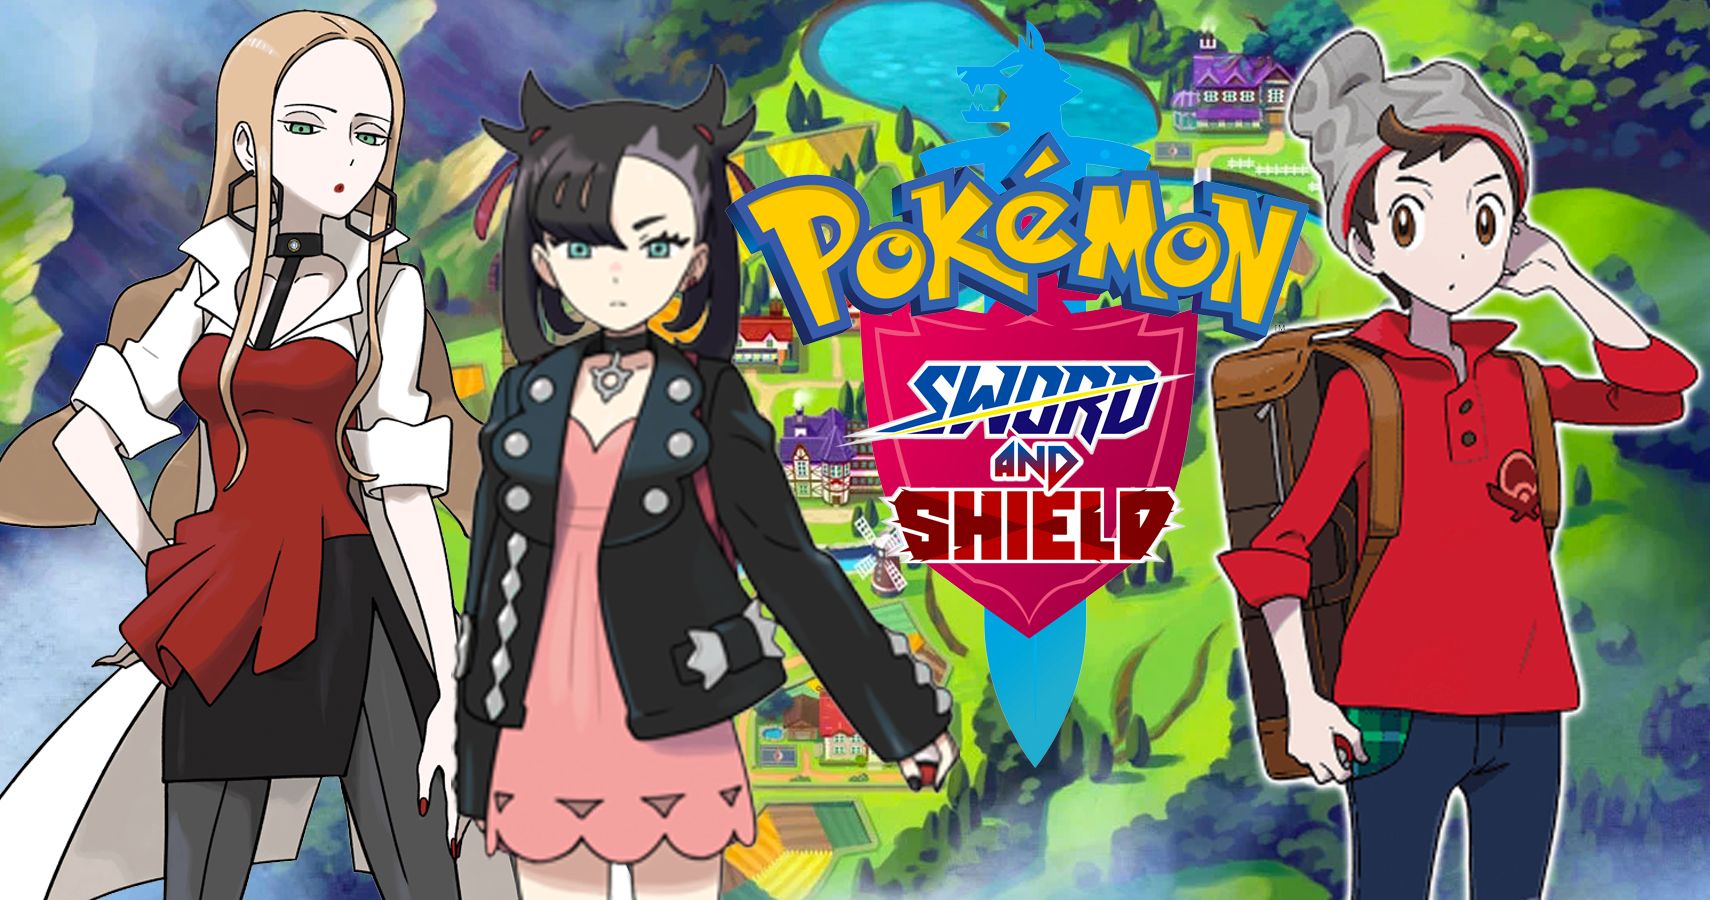 Leaked How Pokémon Sword & Shield’s Characters Might Affect The Story